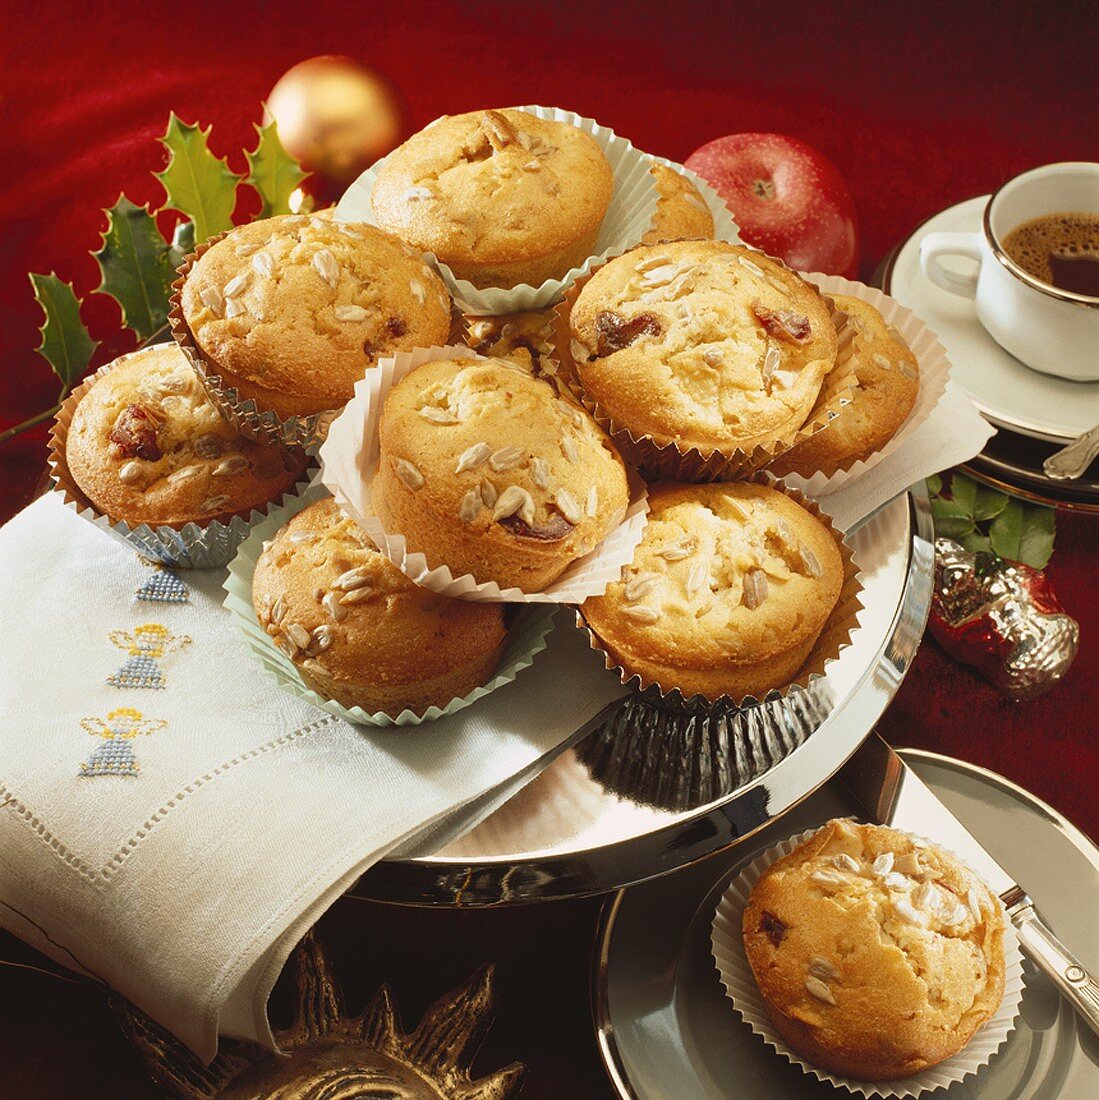 Date and apple muffins for Christmas